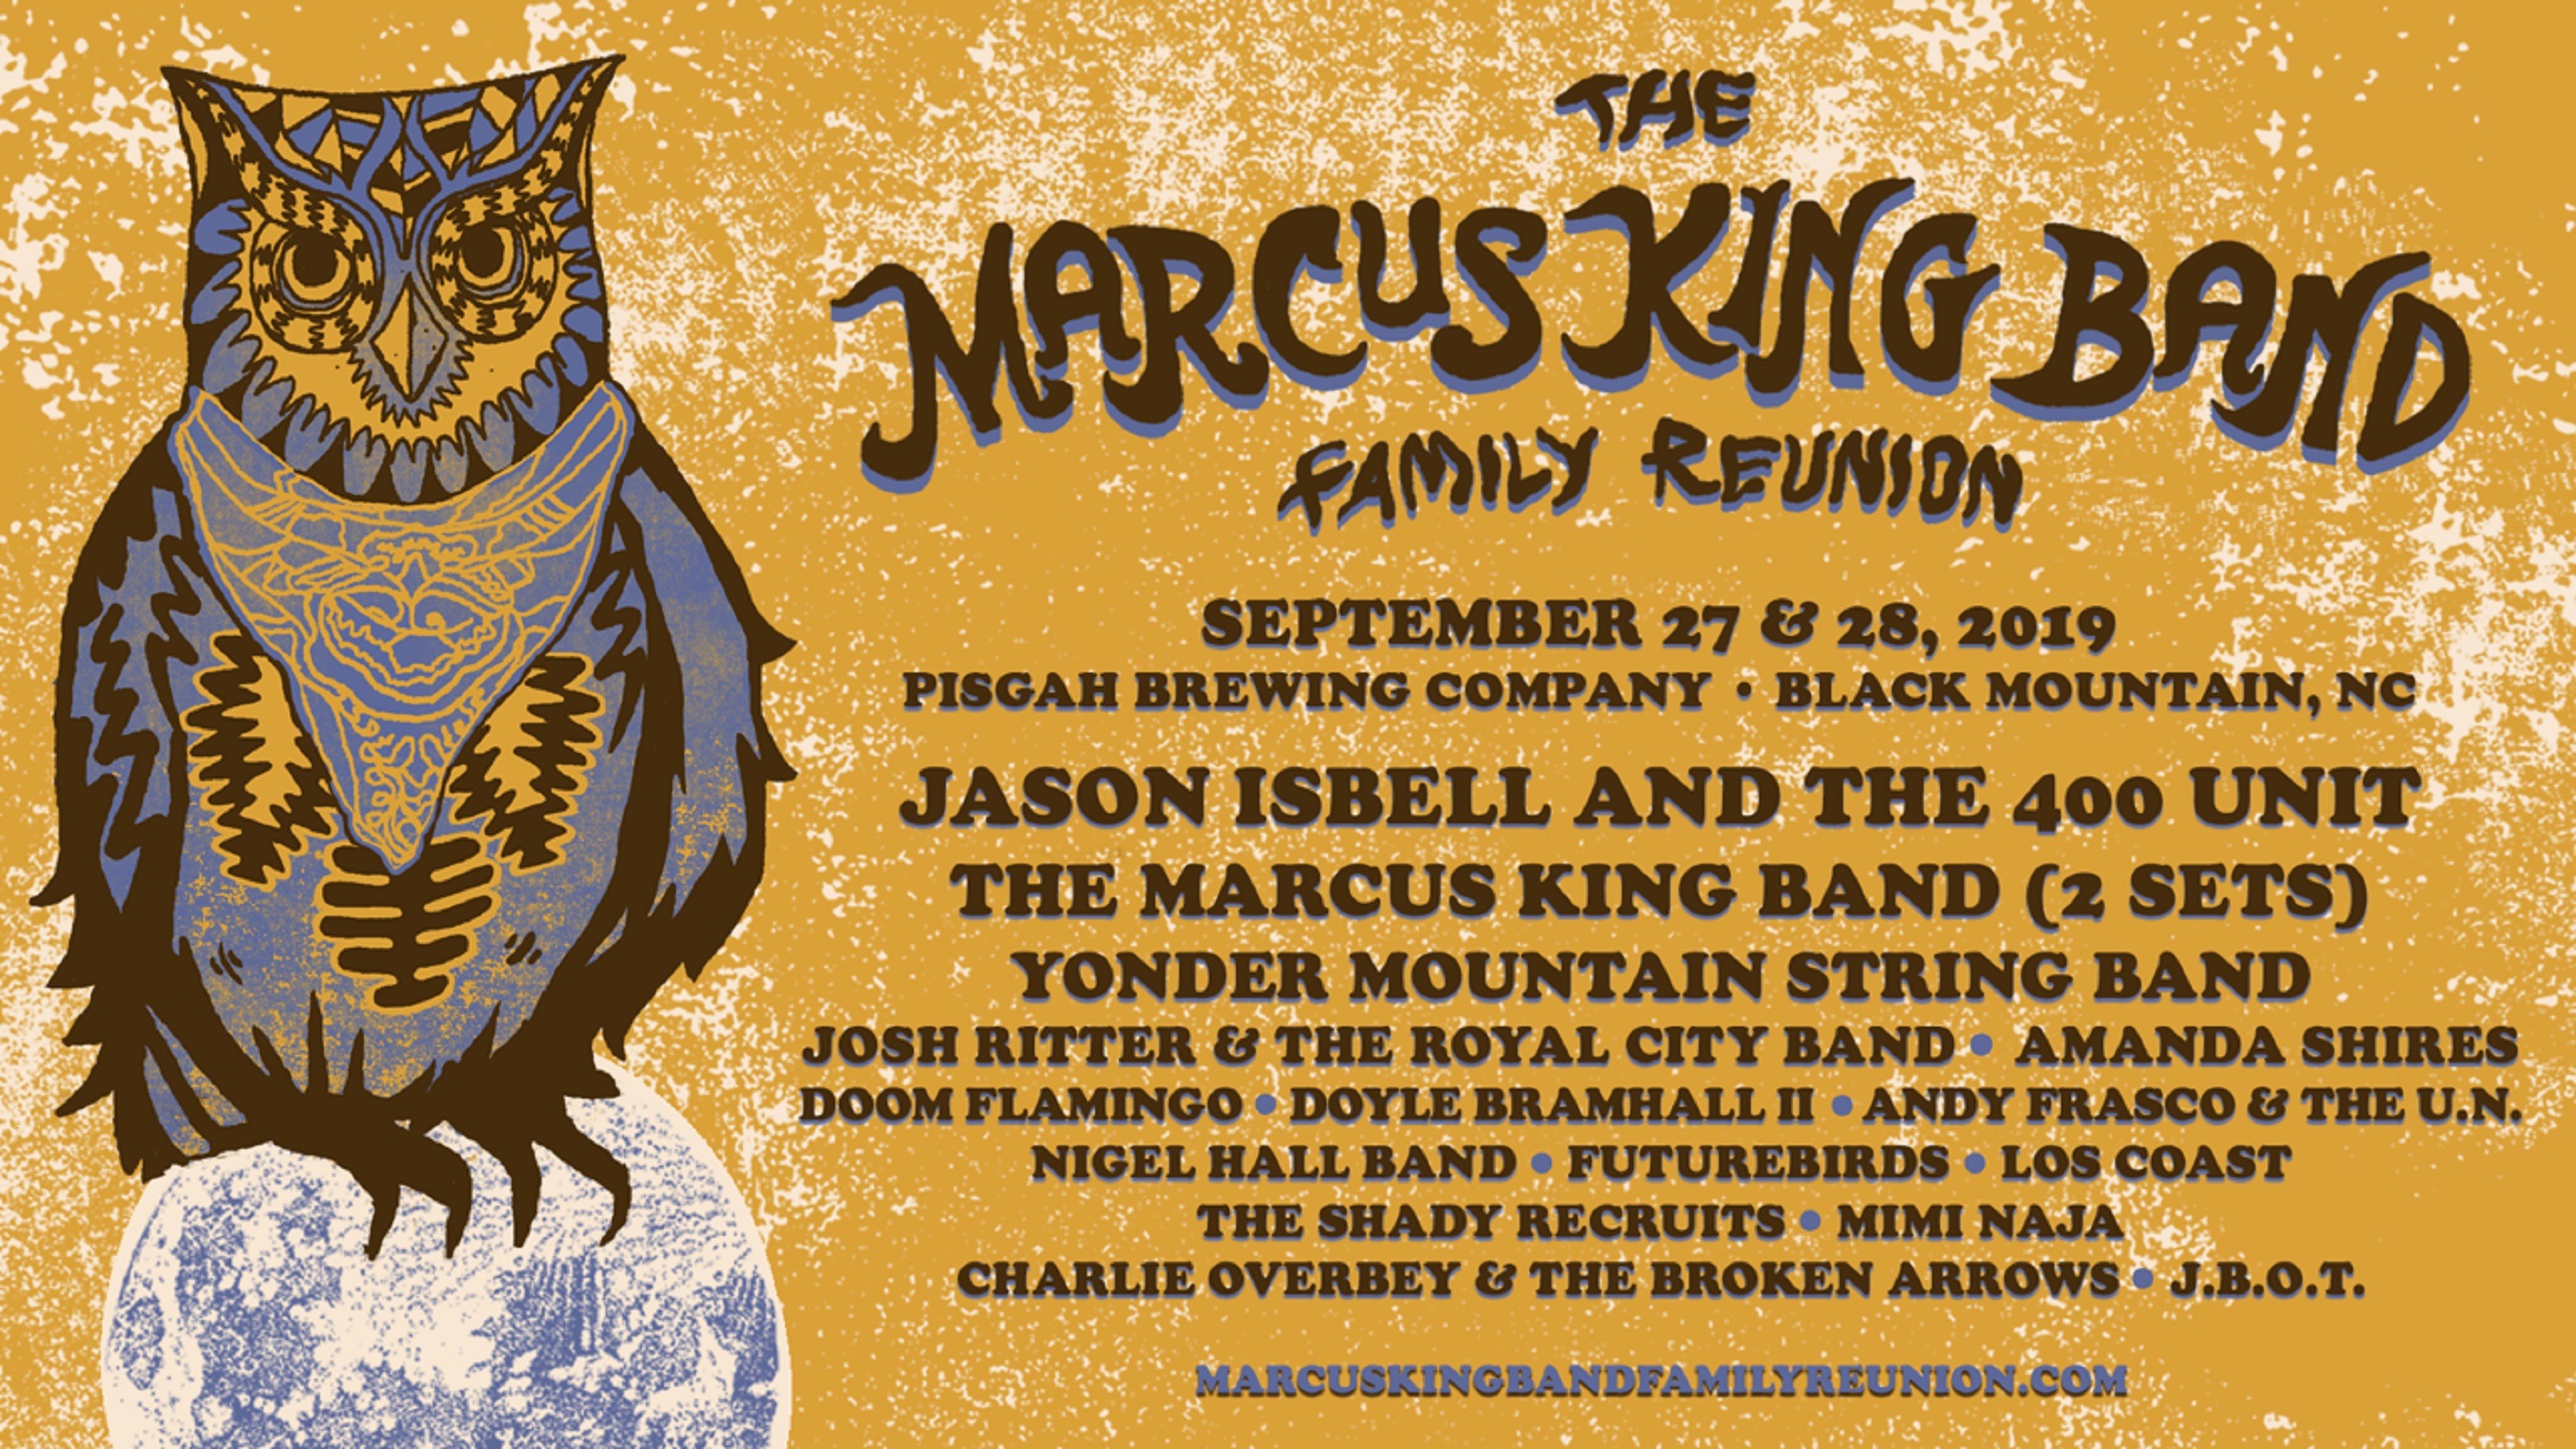 The Marcus King Band Family Reunion Expands Lineup